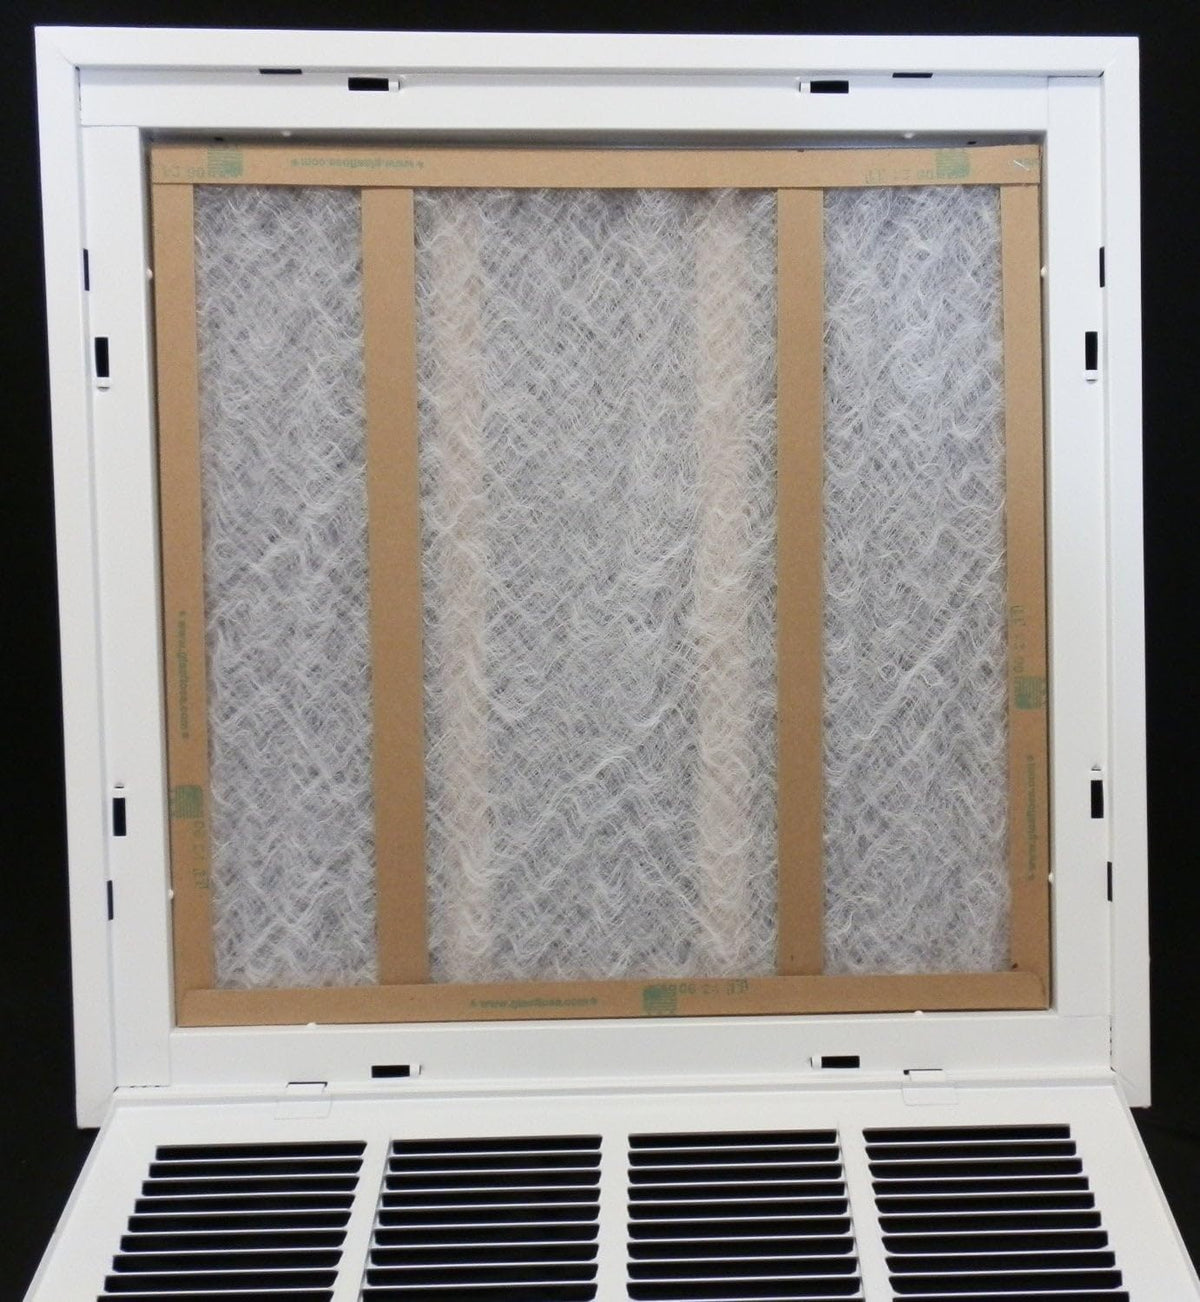 12&quot; X 8&quot; Steel Return Air Filter Grille for 1&quot; Filter - Removable Frame - [Outer Dimensions: 14 5/8&quot; X 10 5/8&quot;]